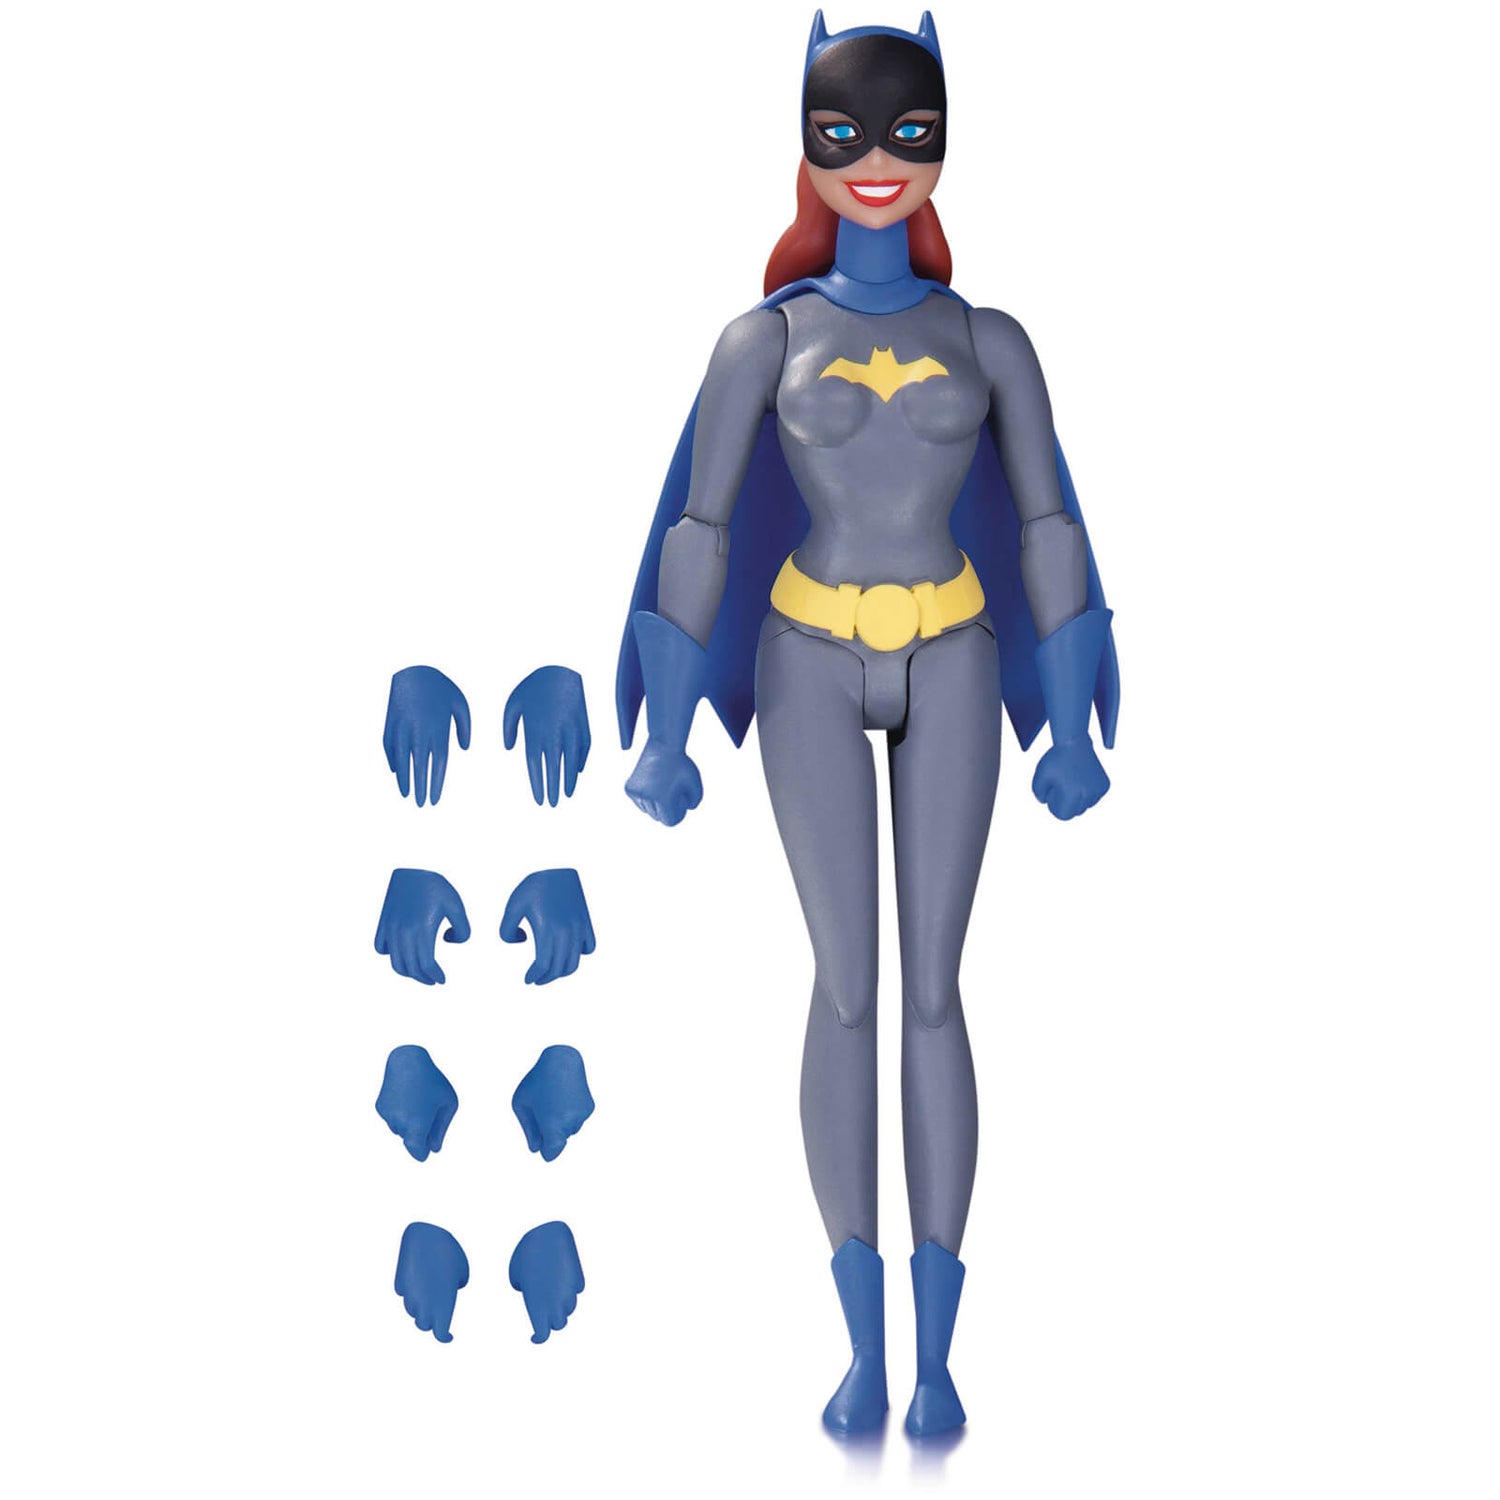 Batman Animated - DC 6 Inch Action Figure #34: Batgirl (Gray Suit / The Animated Series Version)